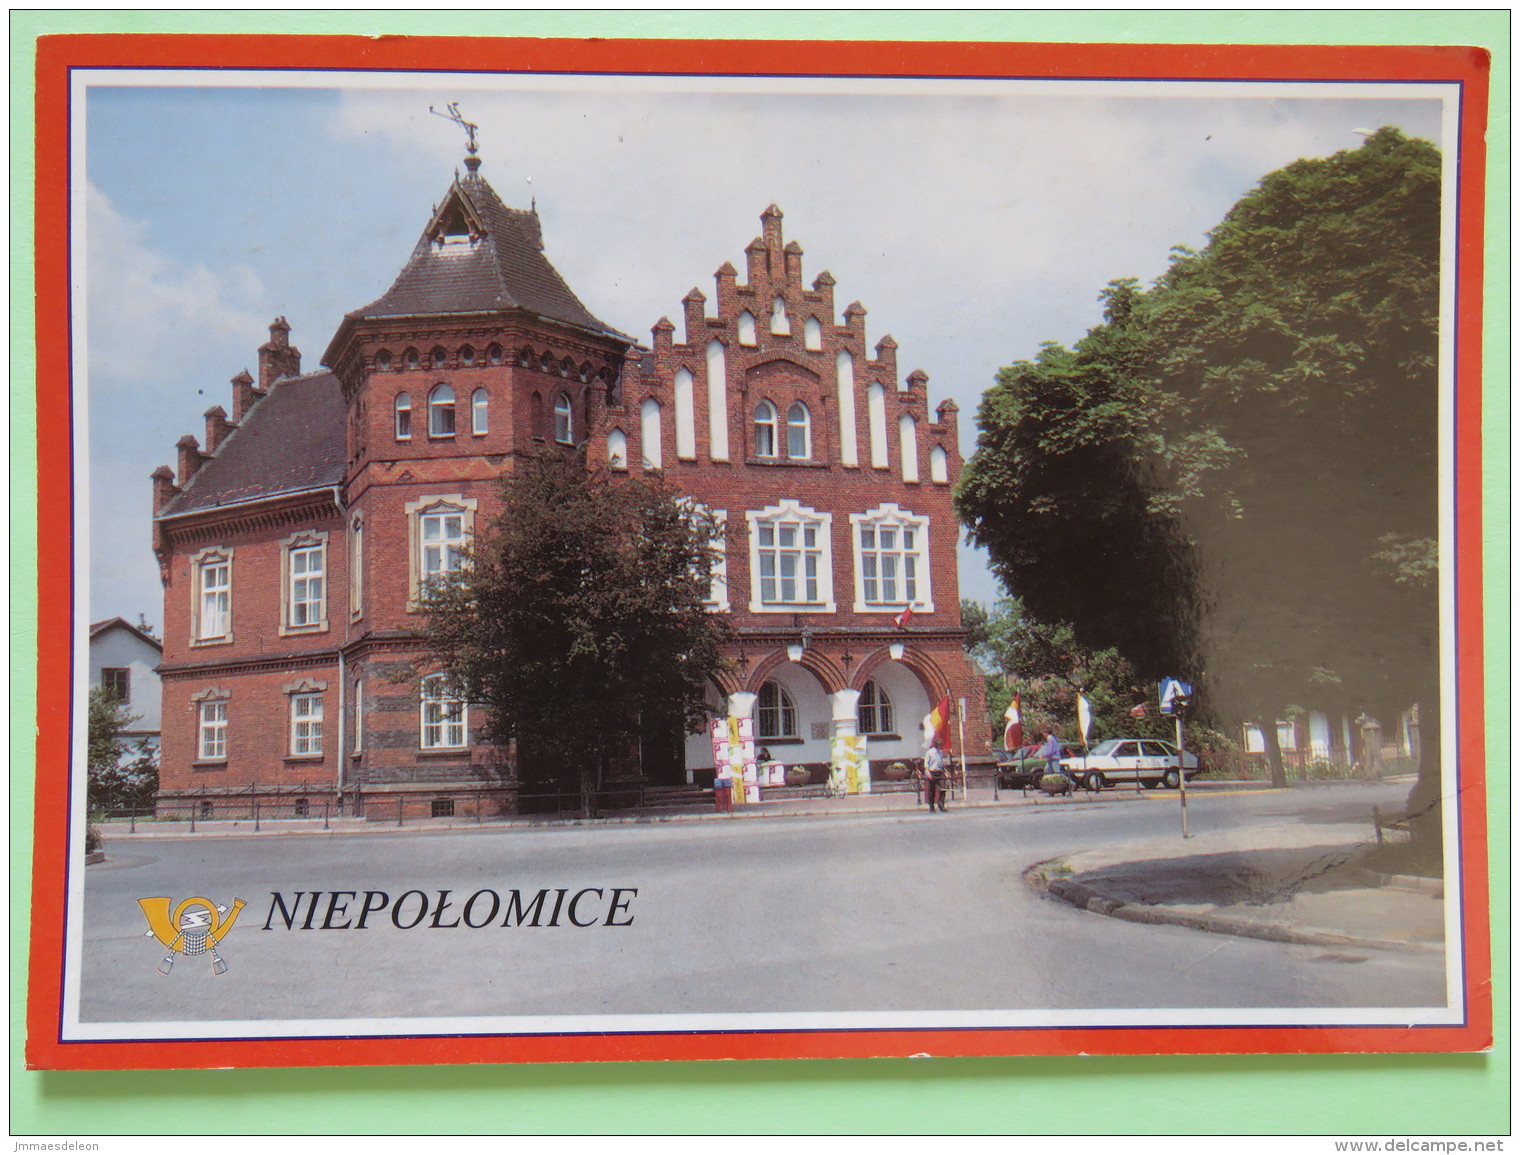 Poland 1999 Postcard ""Niepolomice Castle"" To England - Due Tax - Domino Game Love Dominoes - Poland